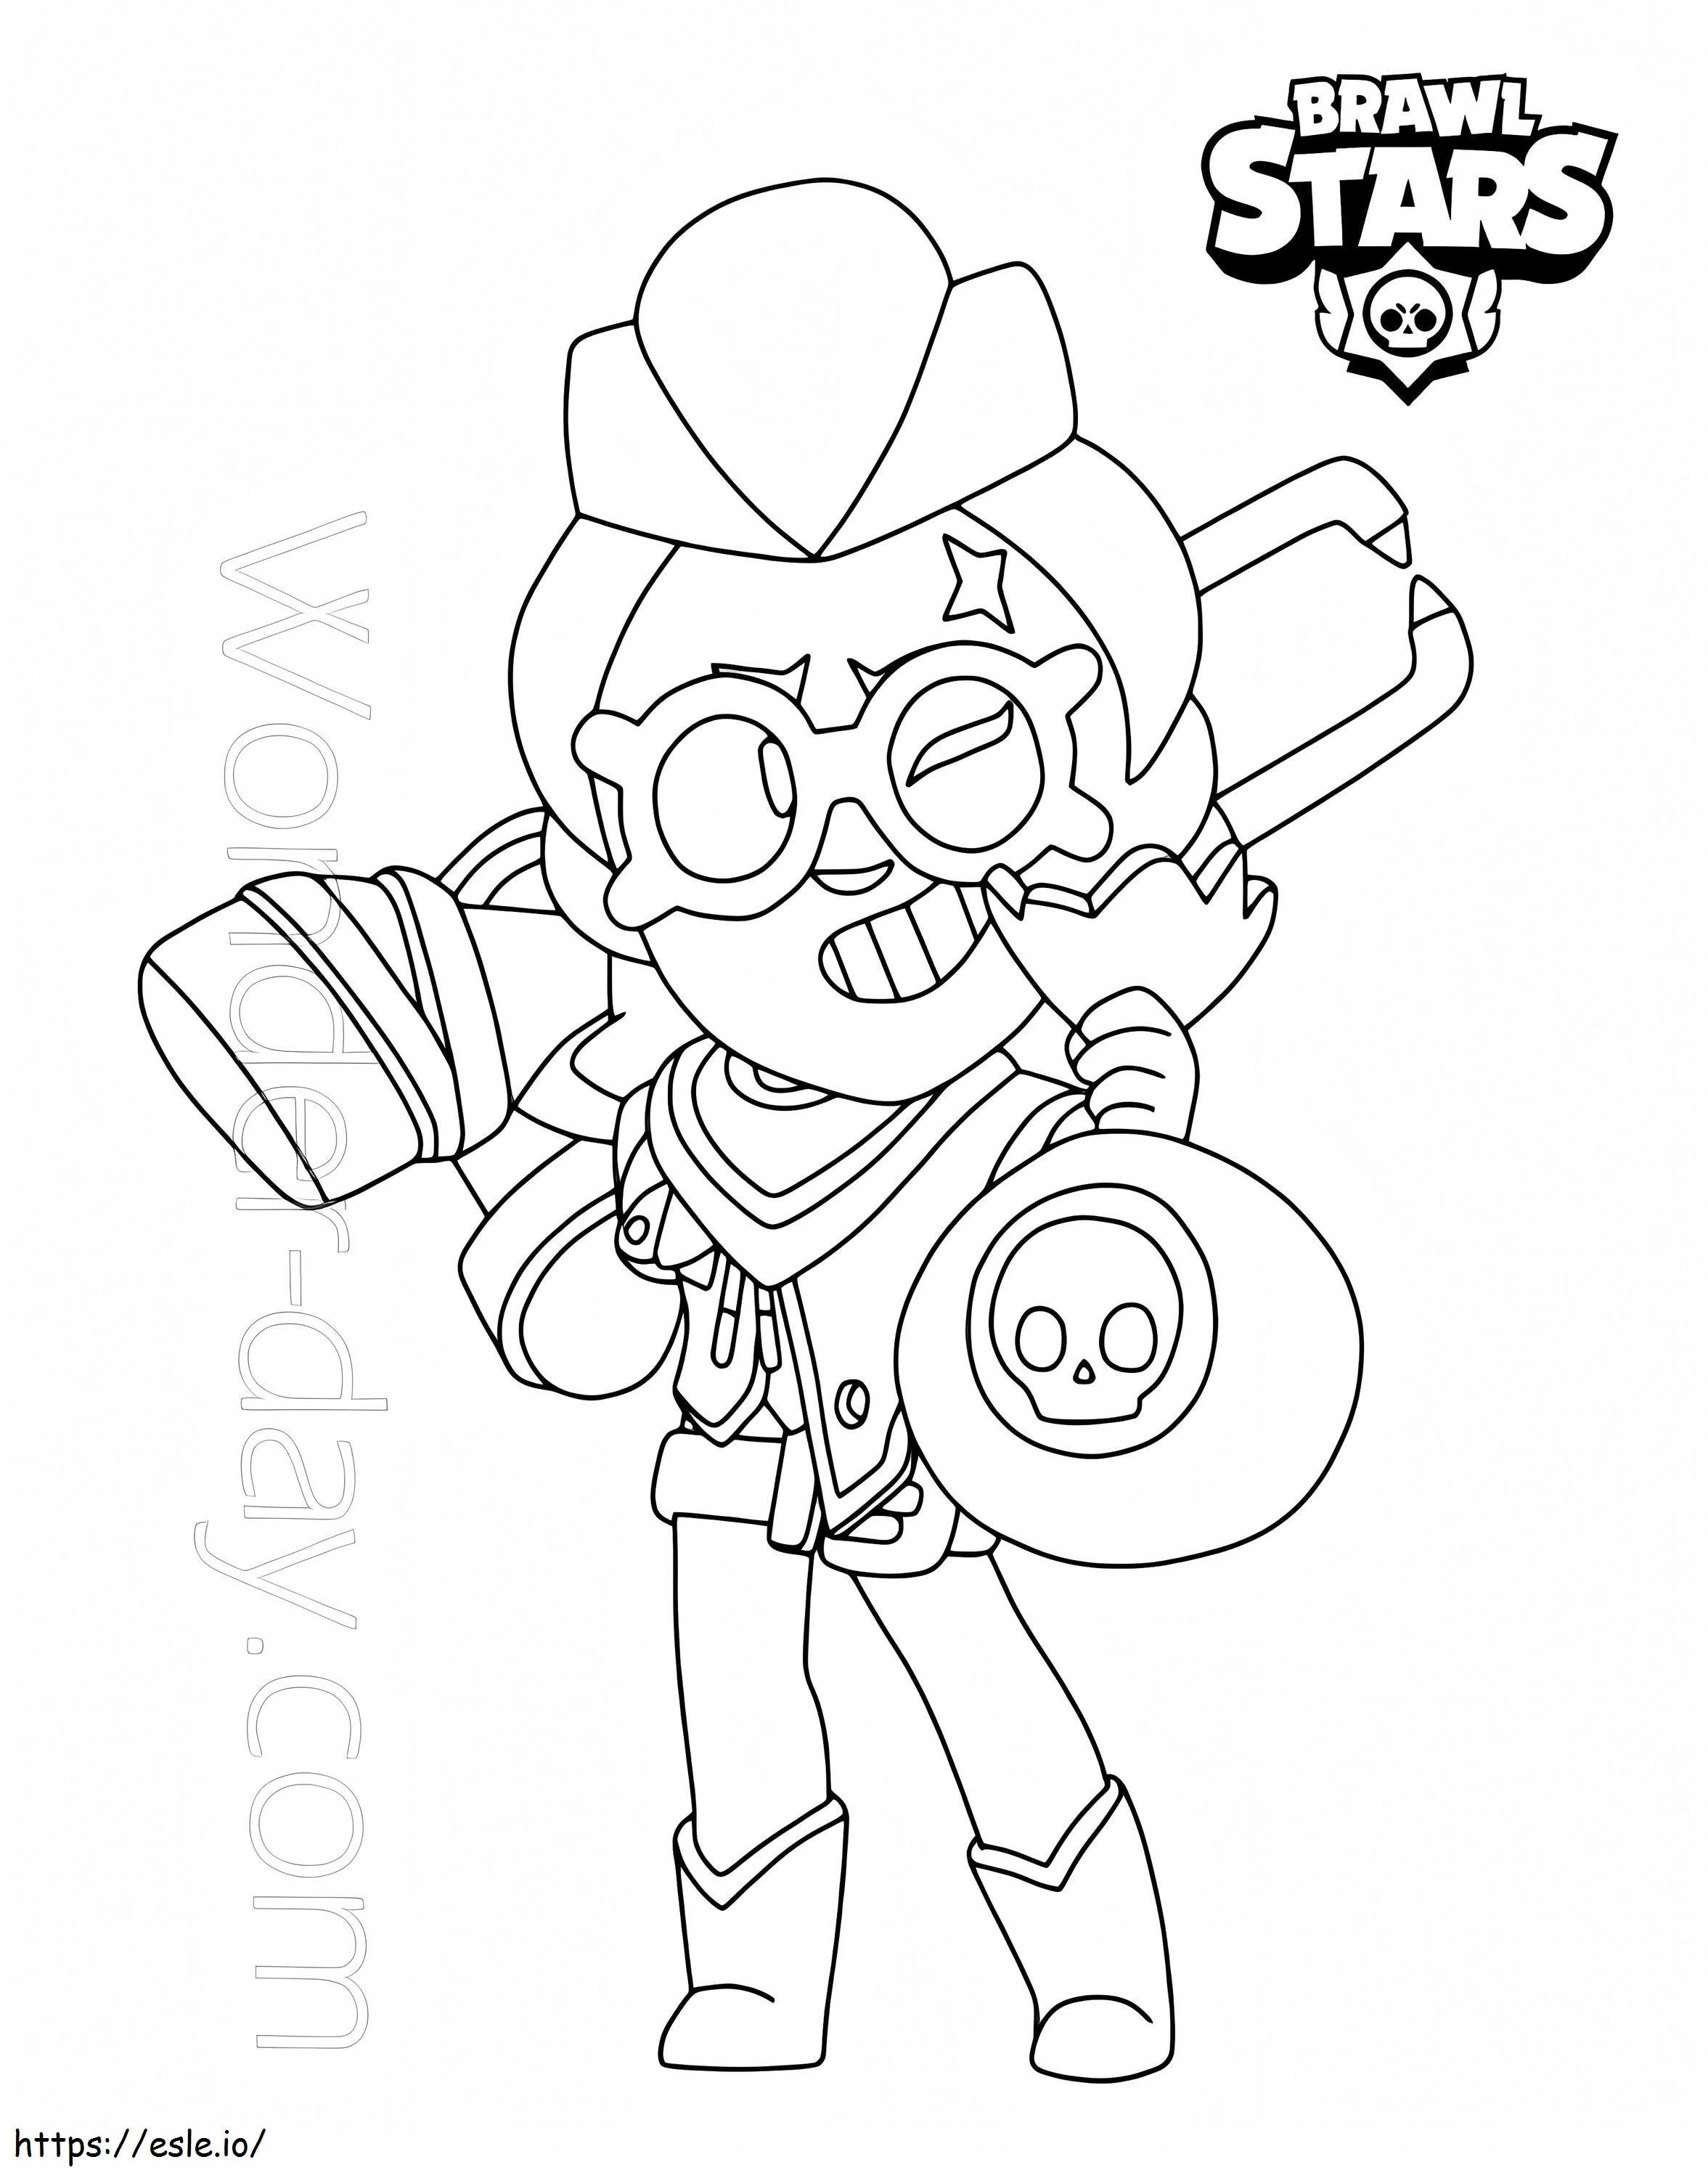 Brawl Stars Belle coloring page